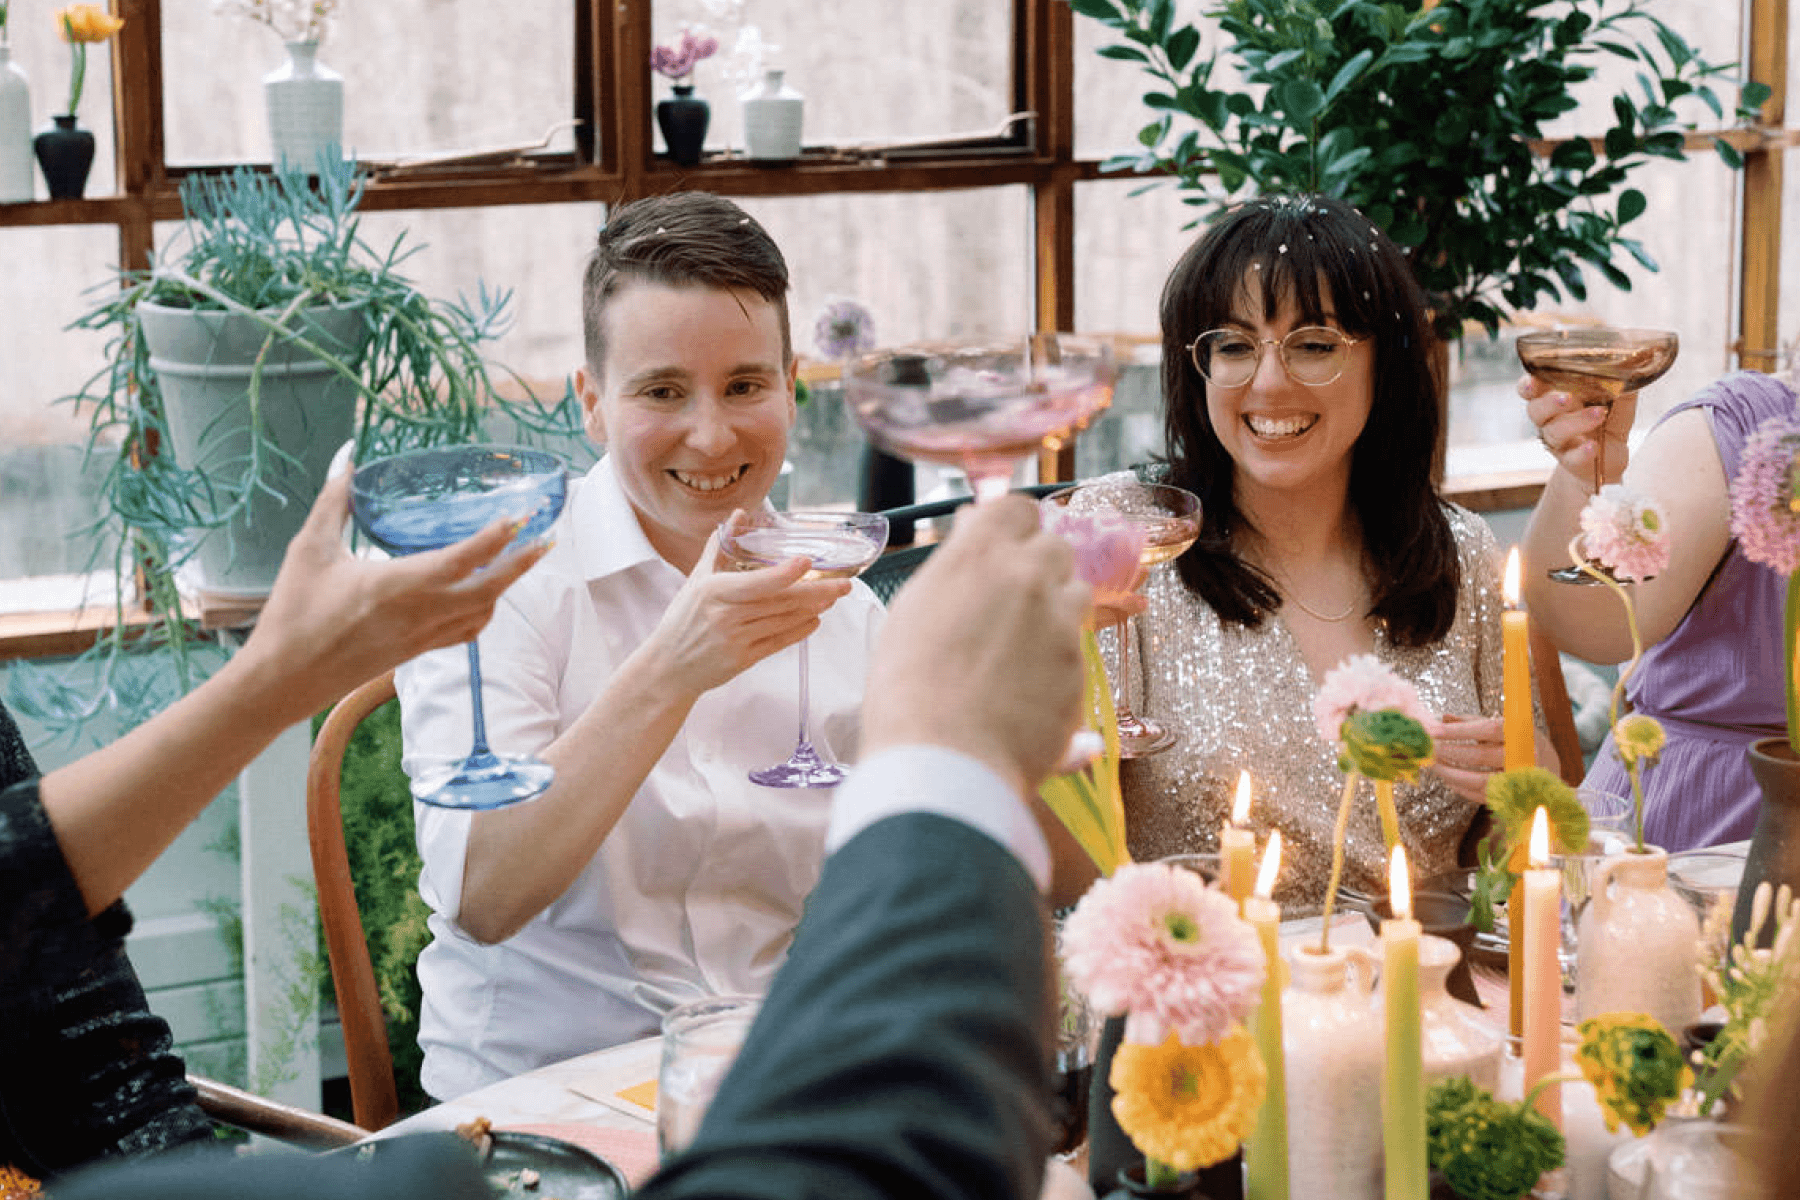 People in cocktail attire raise colorful coupe glasses to cheers at a flower-filled table